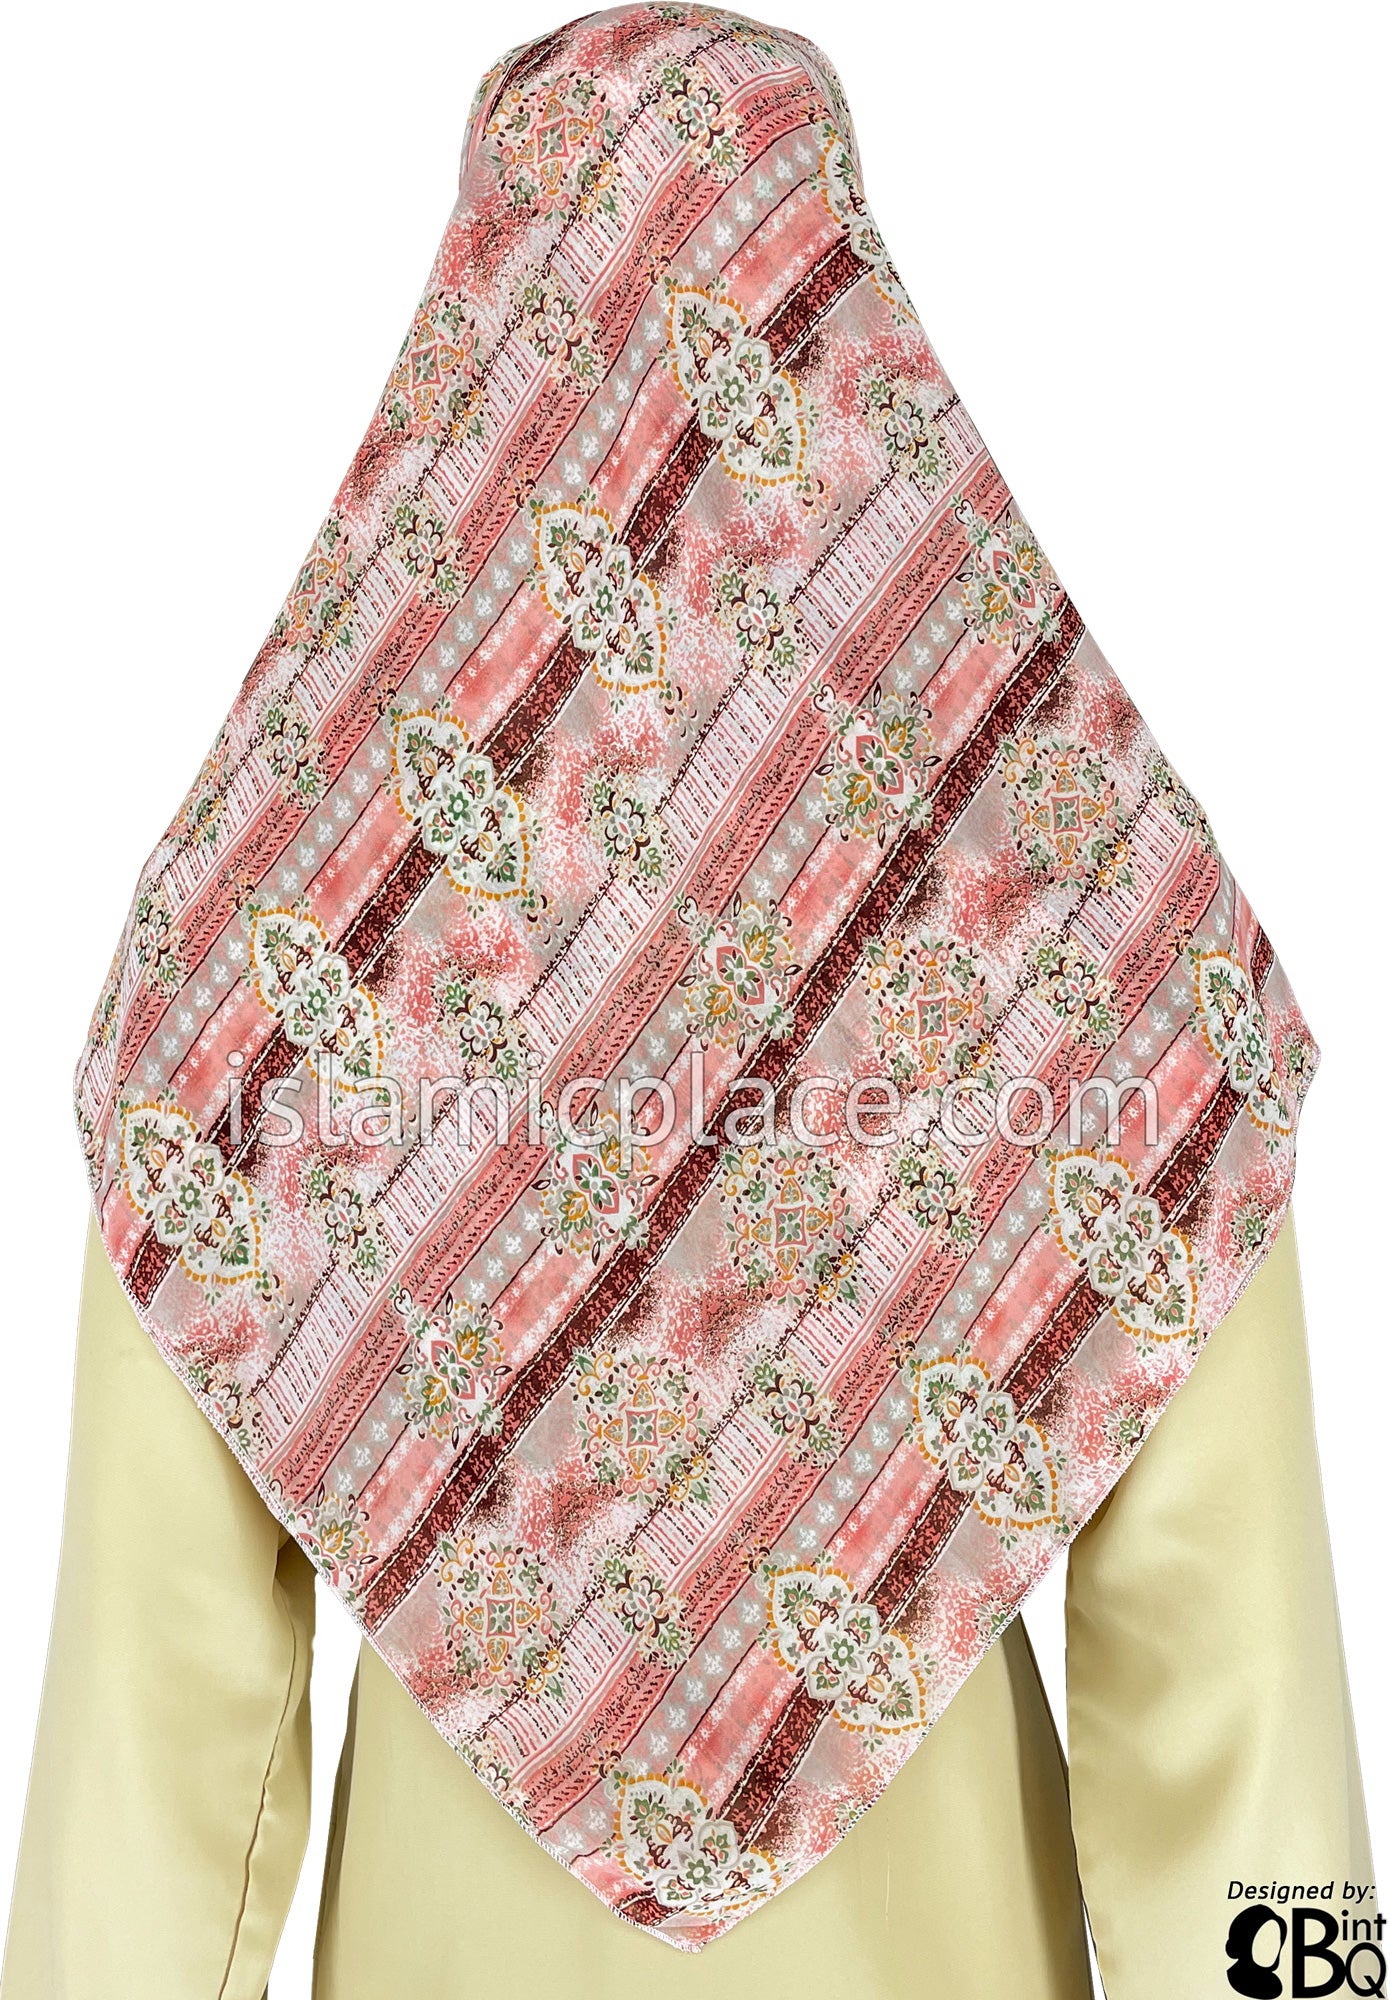 Peach, White, Burgundy and Green Victorian Design - 45" Square Printed Khimar